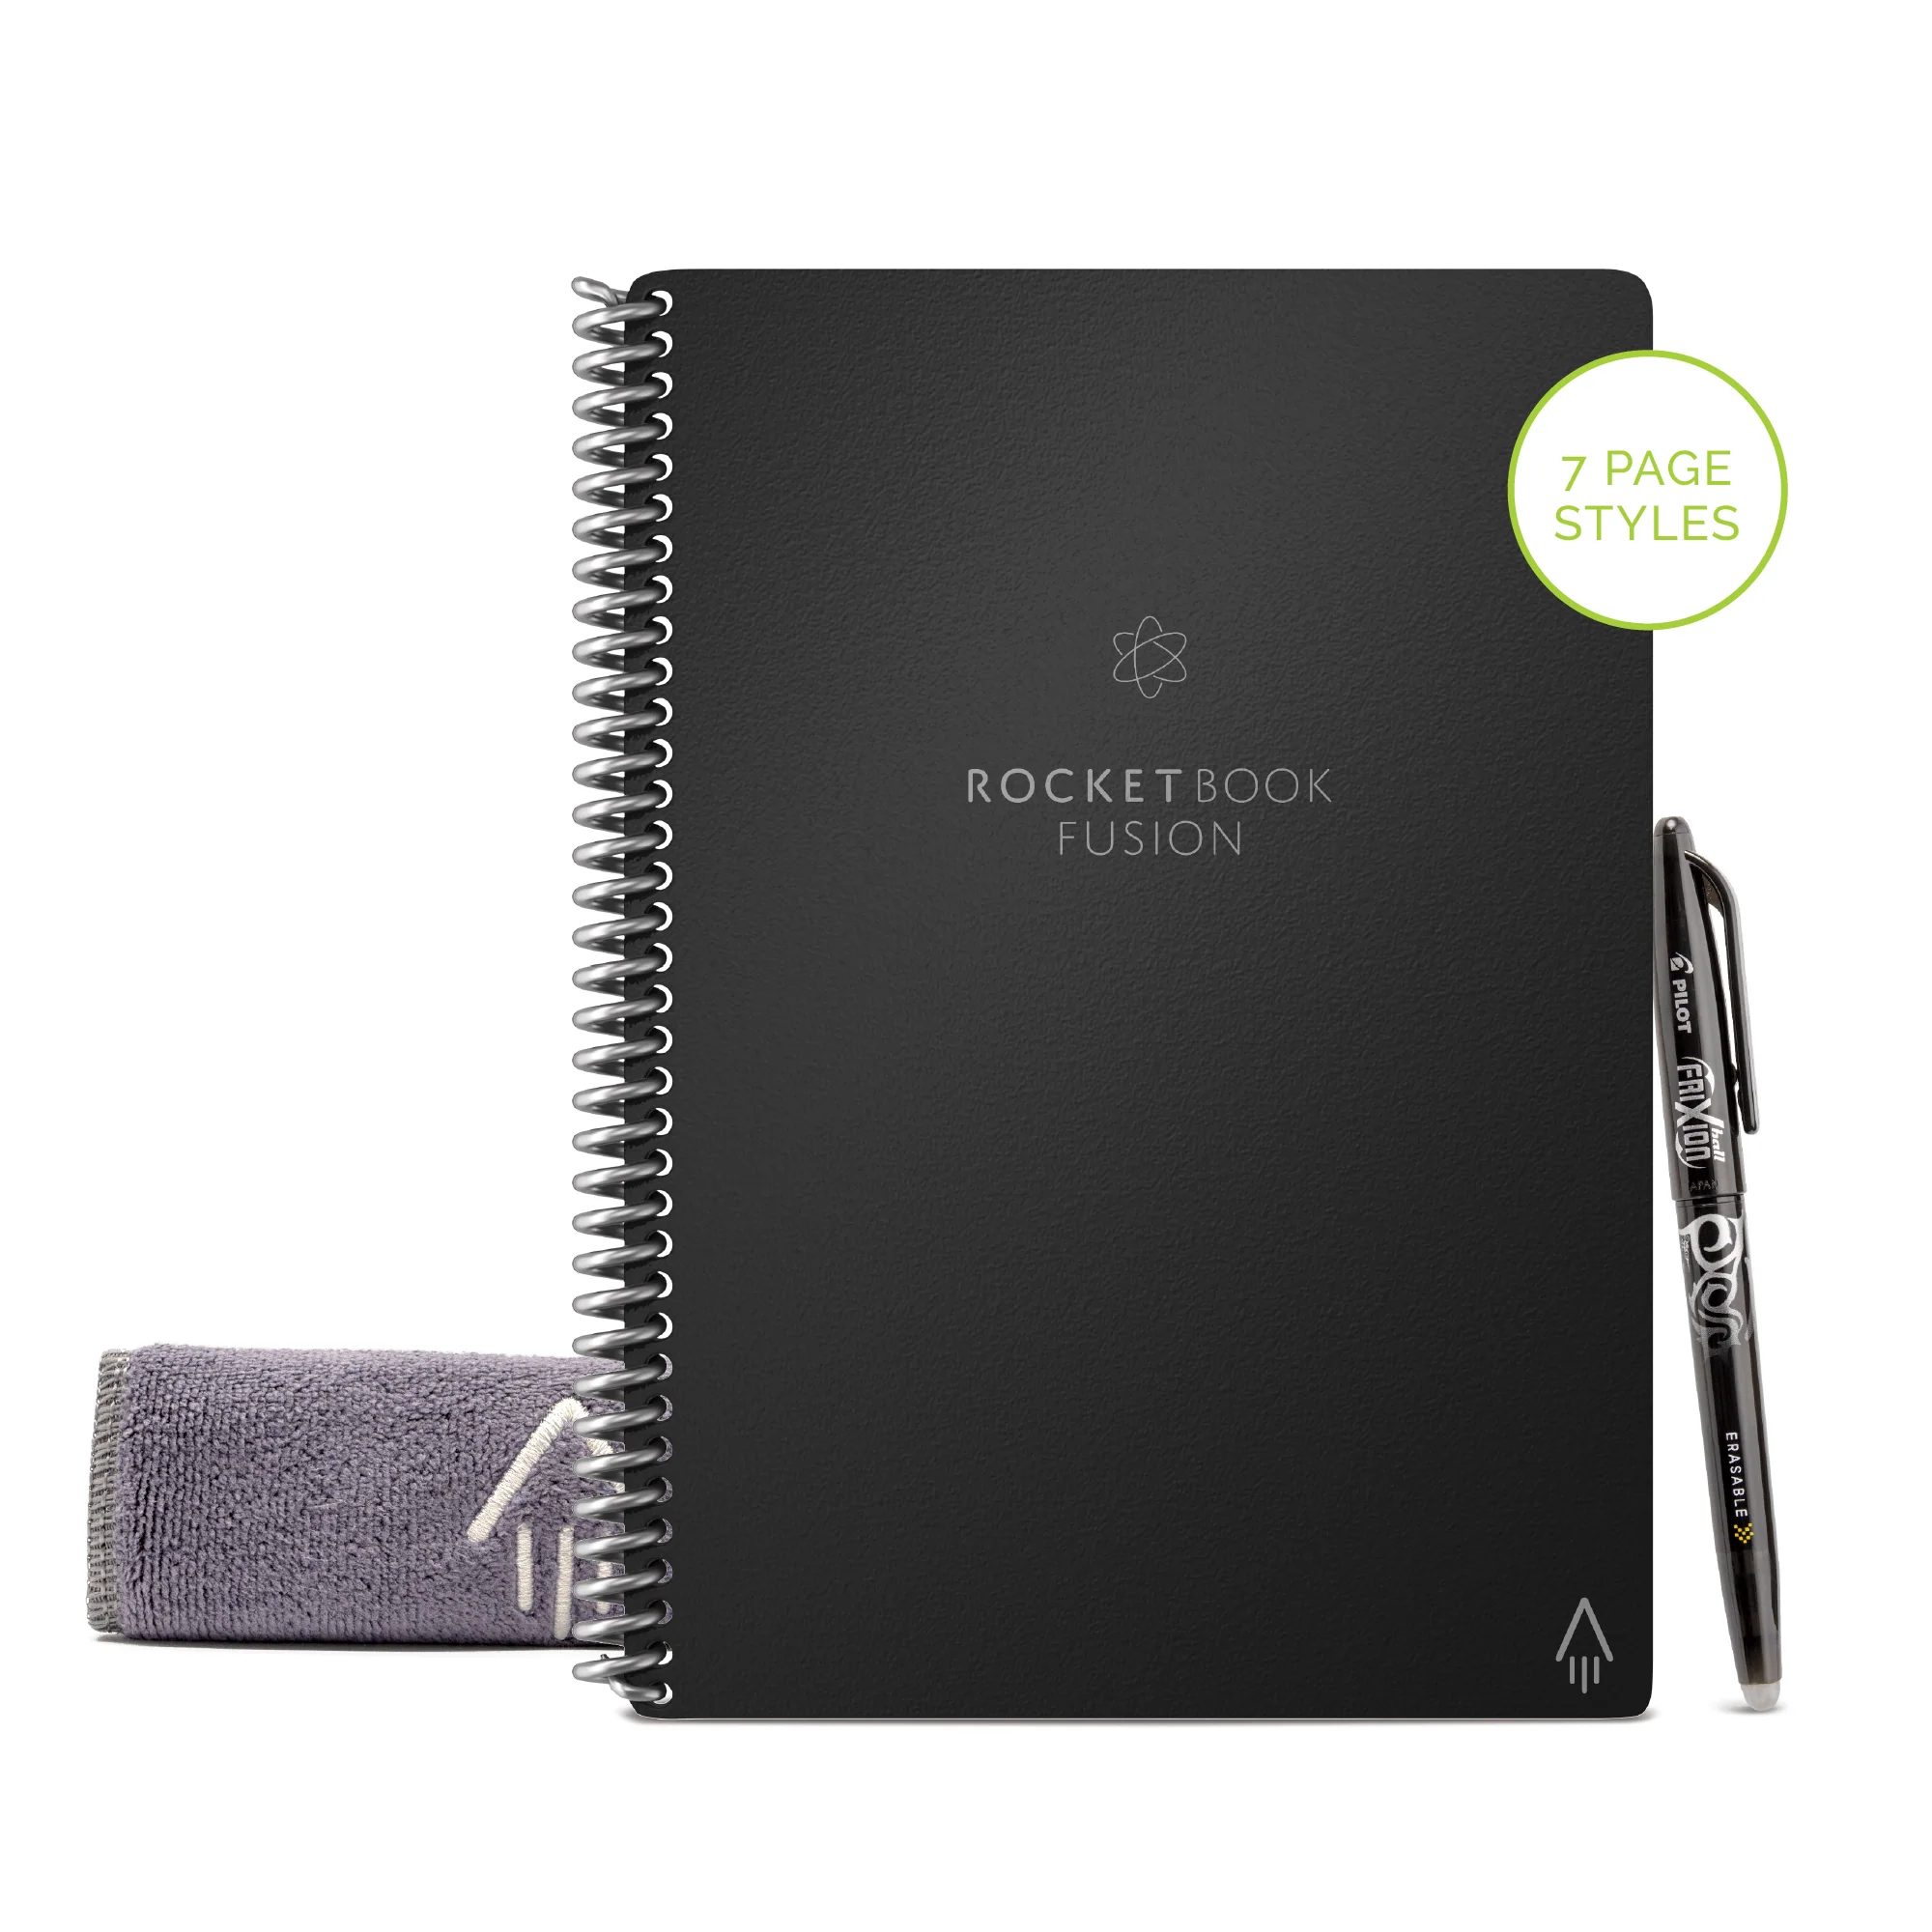 Rocket Book© FUSION - Smart Note Book: Infinity Black, 42  Styled Pages - A4